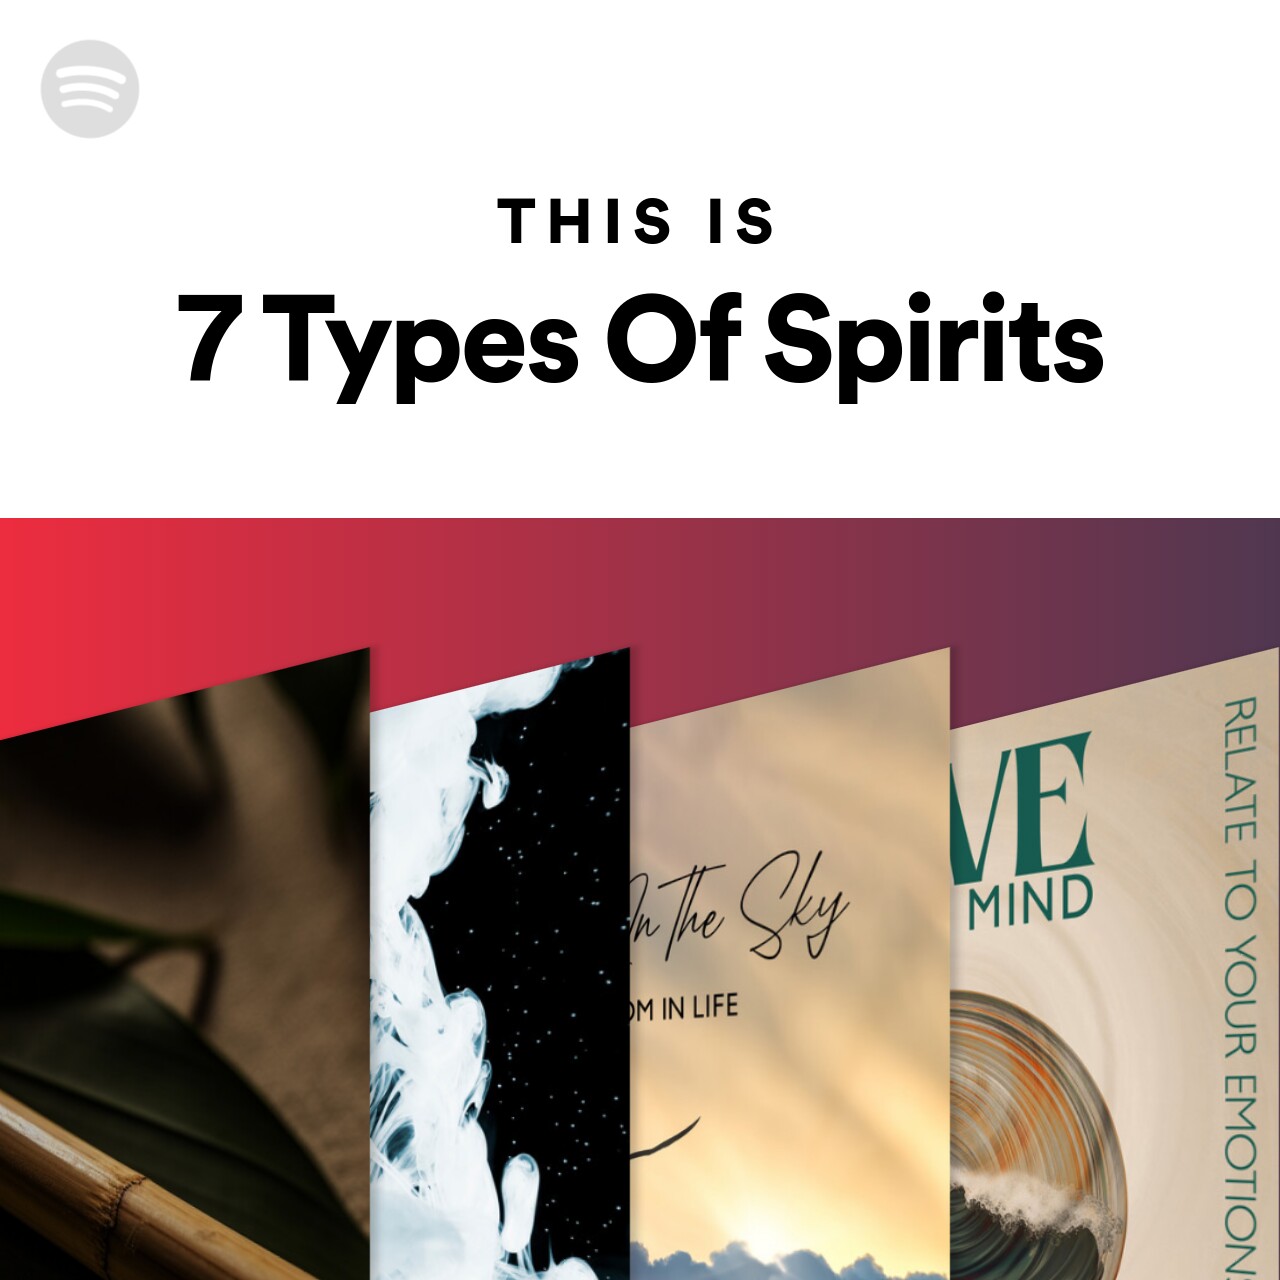 This Is 7 Types Of Spirits